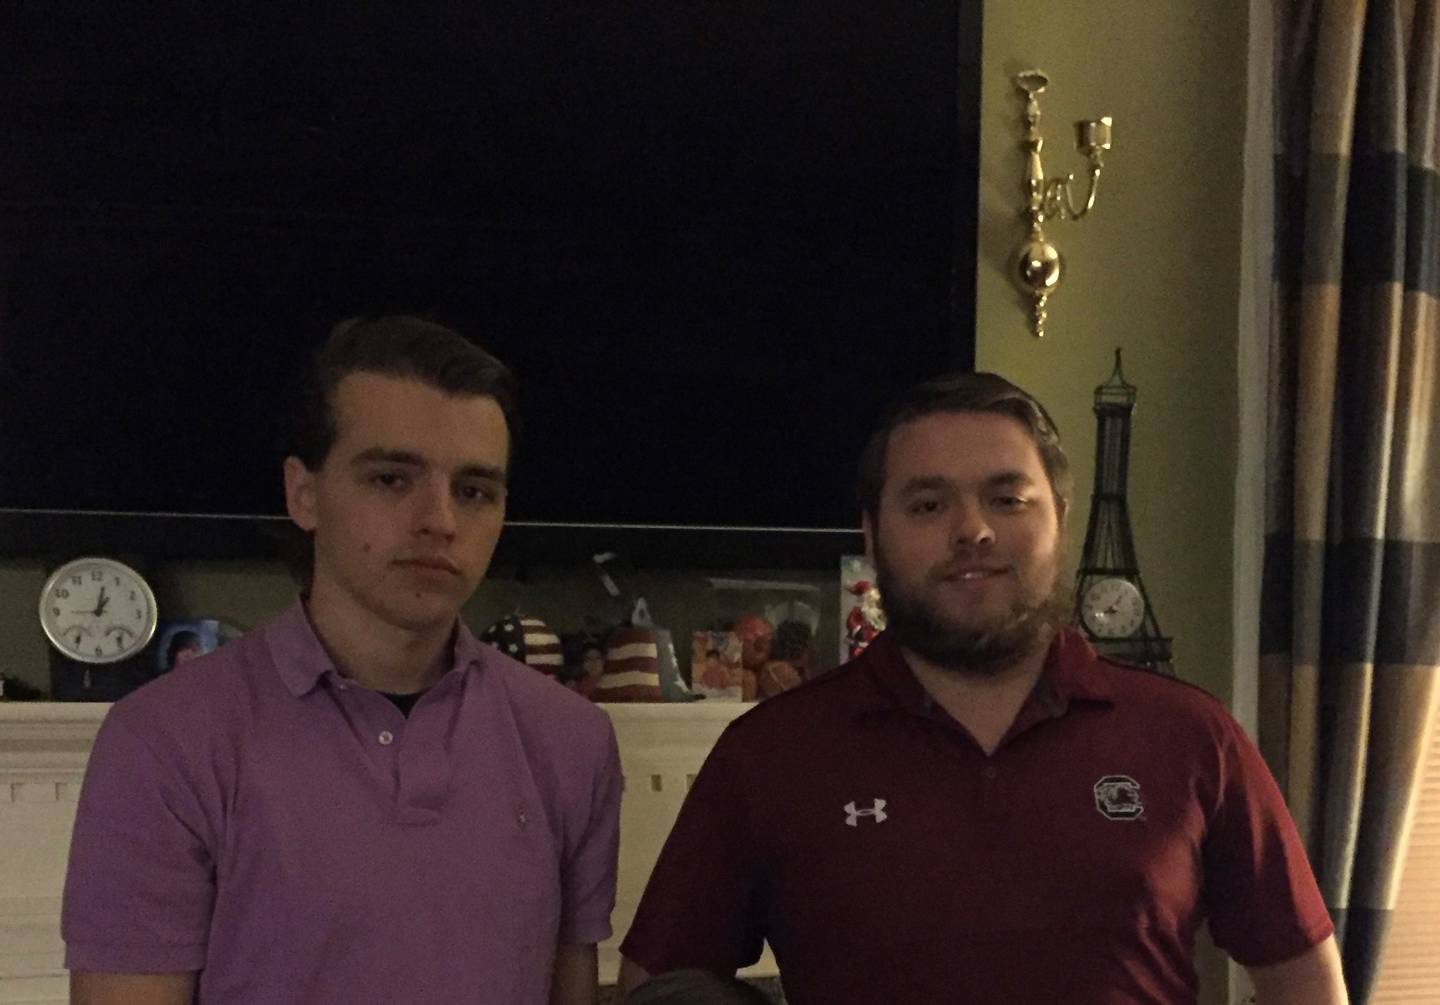 Undated photo shows David Linthicum, left, with his brother Martin, on Thanksgiving 2015.